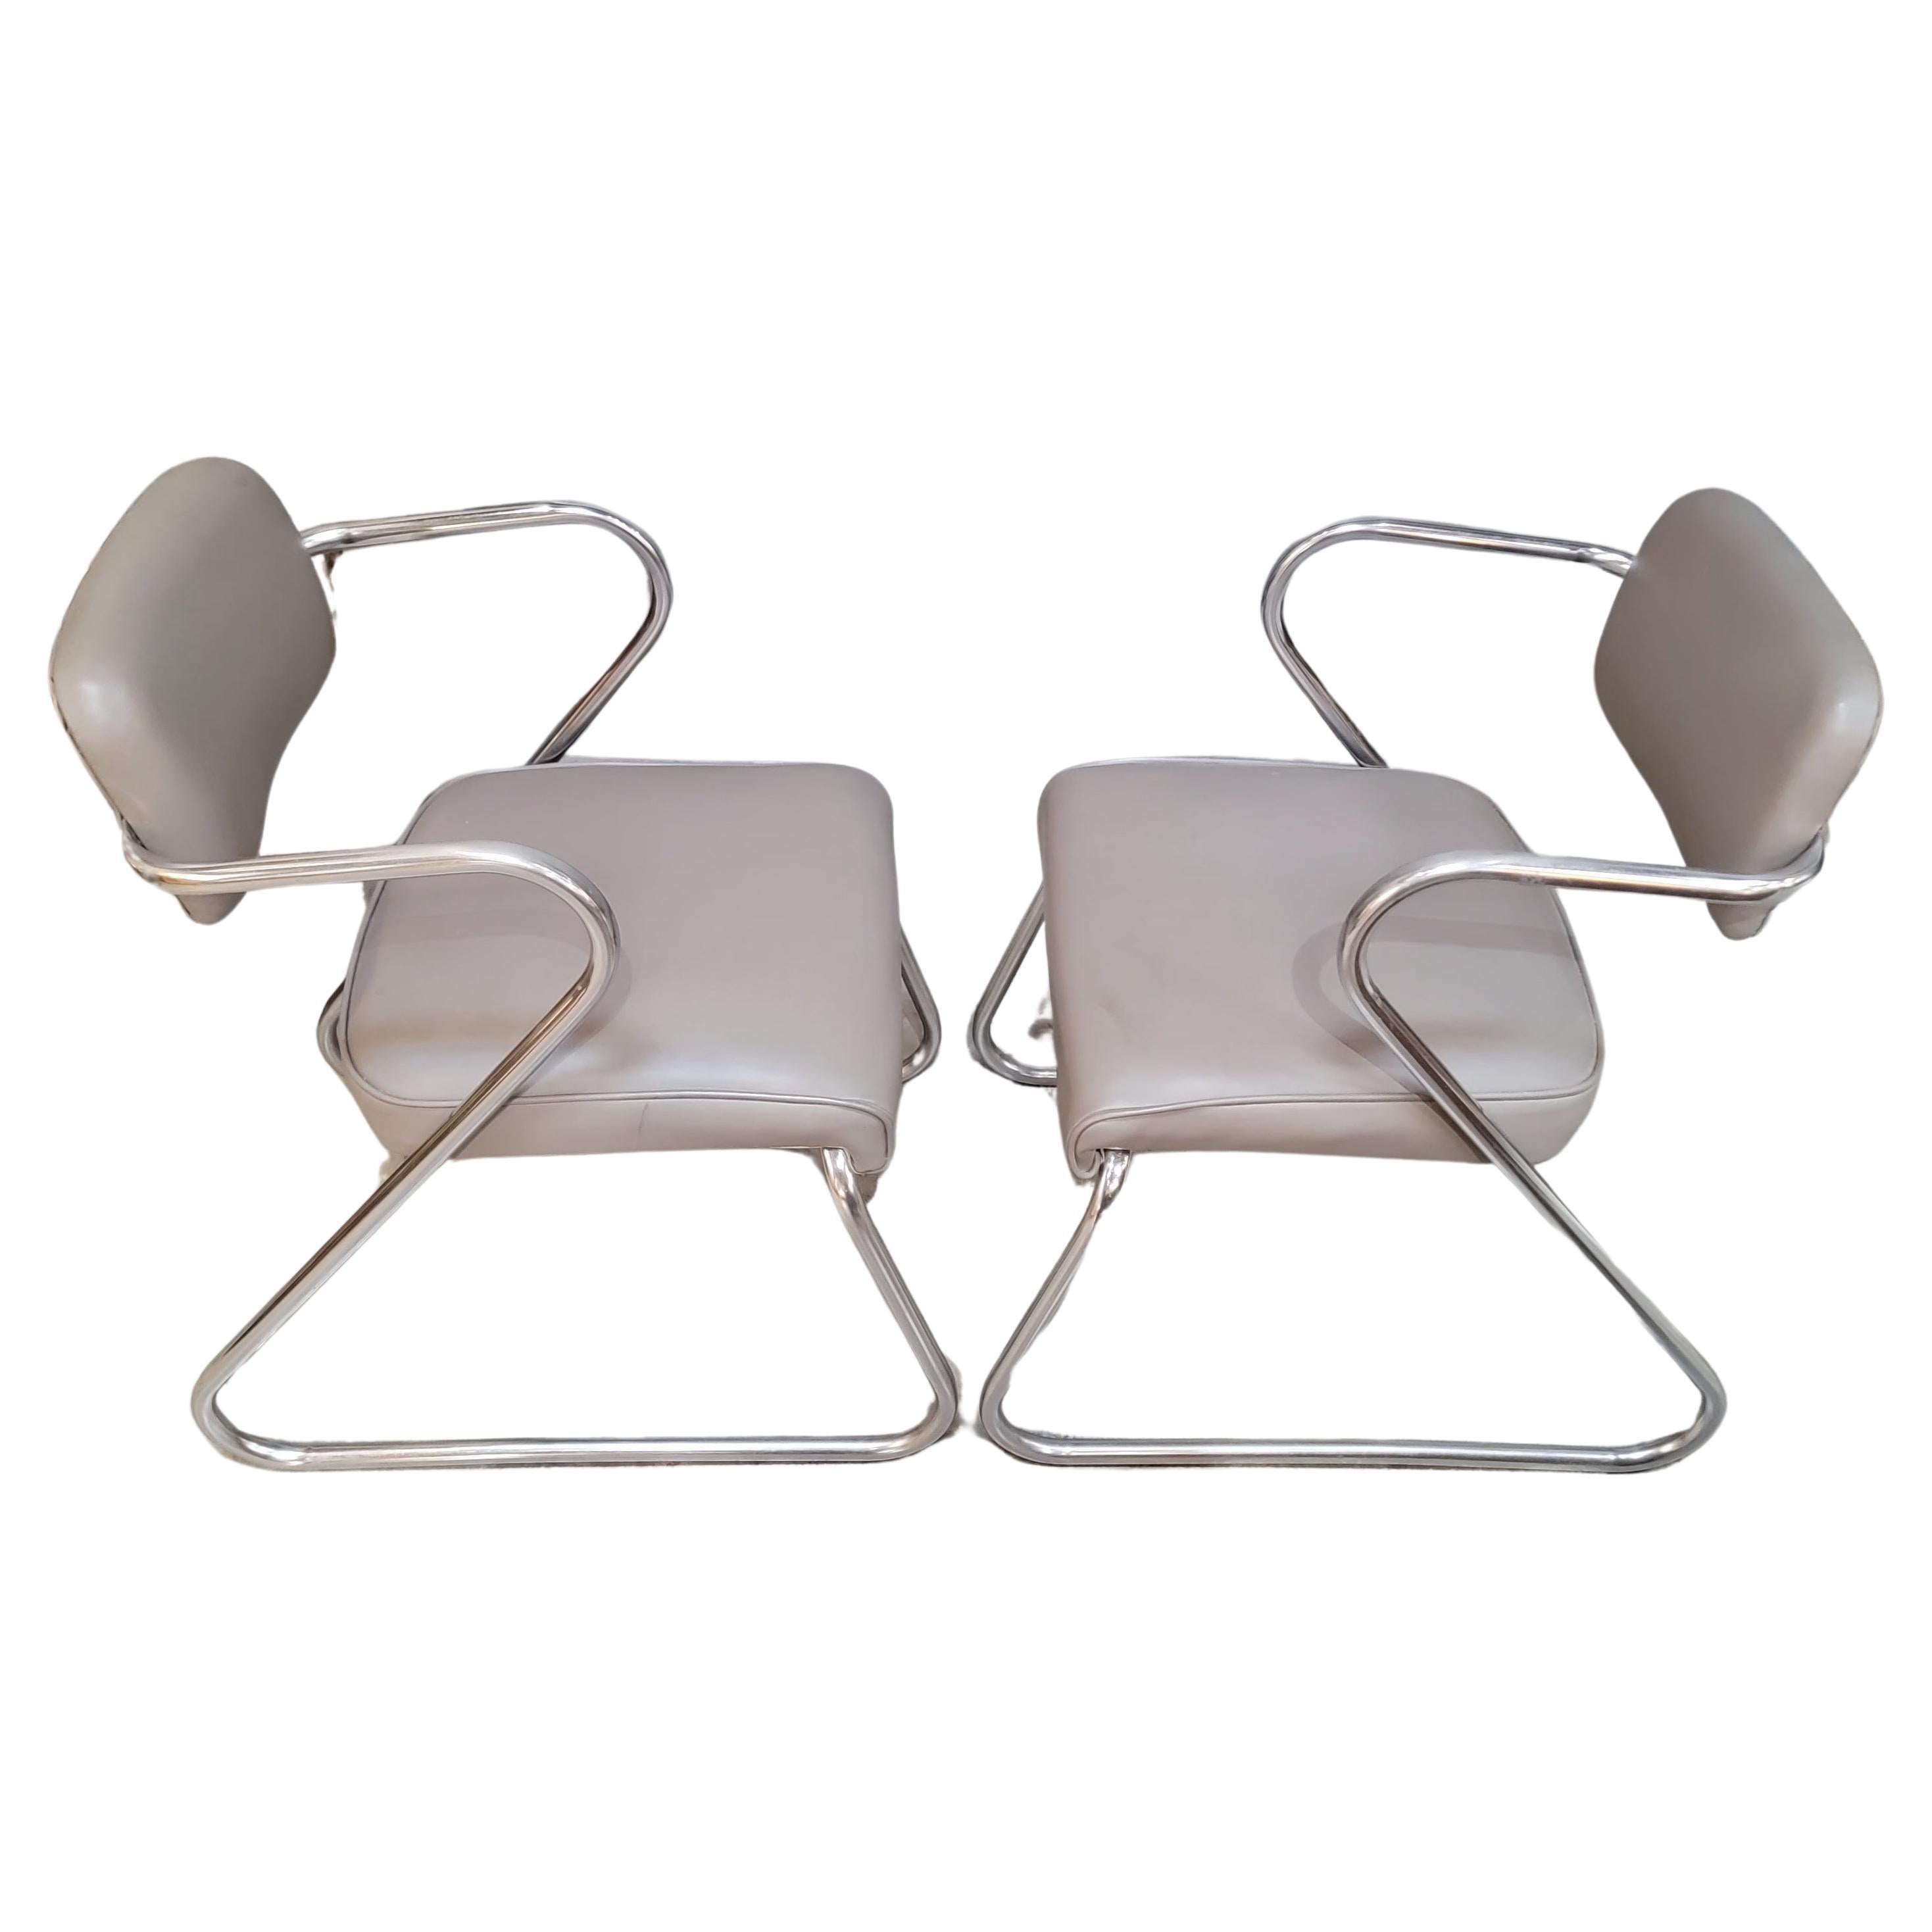 1950's Chrome Chairs Manner of KEM Weber A Pair For Sale